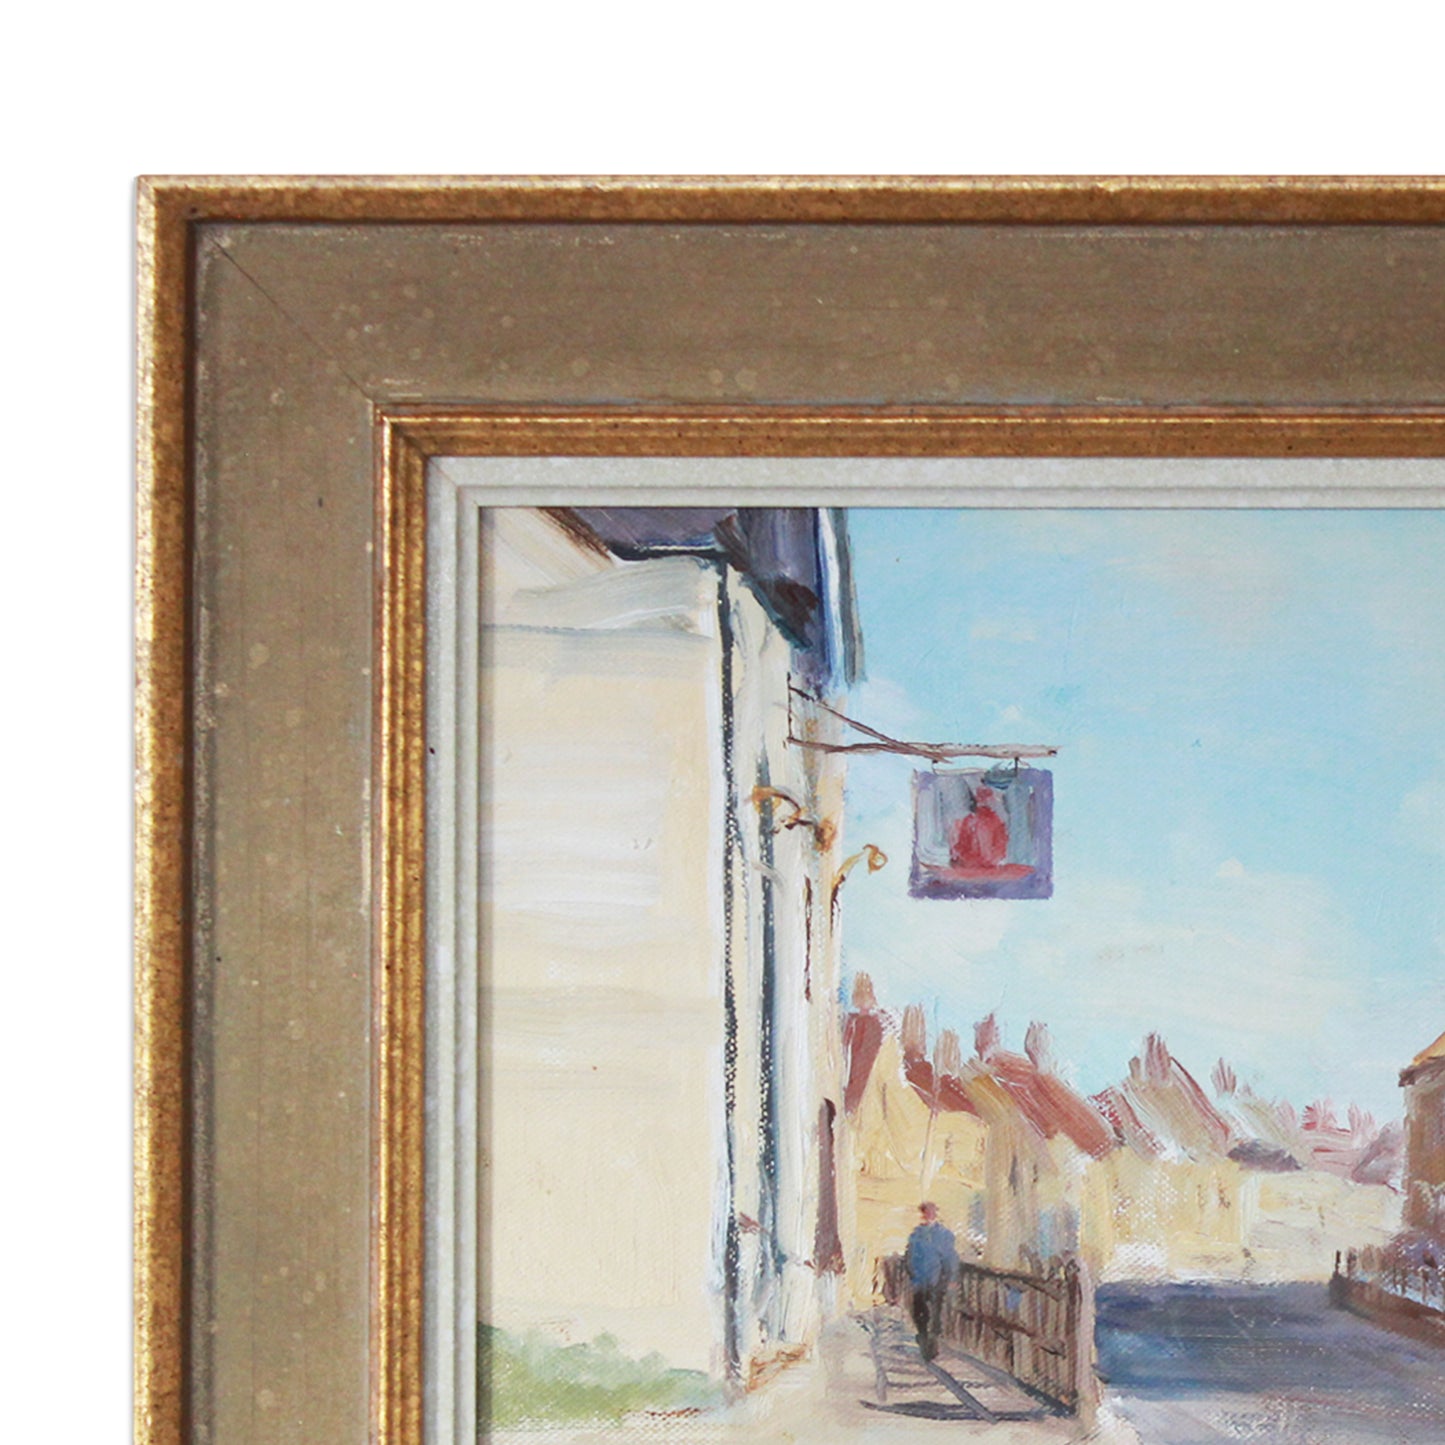 Higham Ferrers Oil Painting